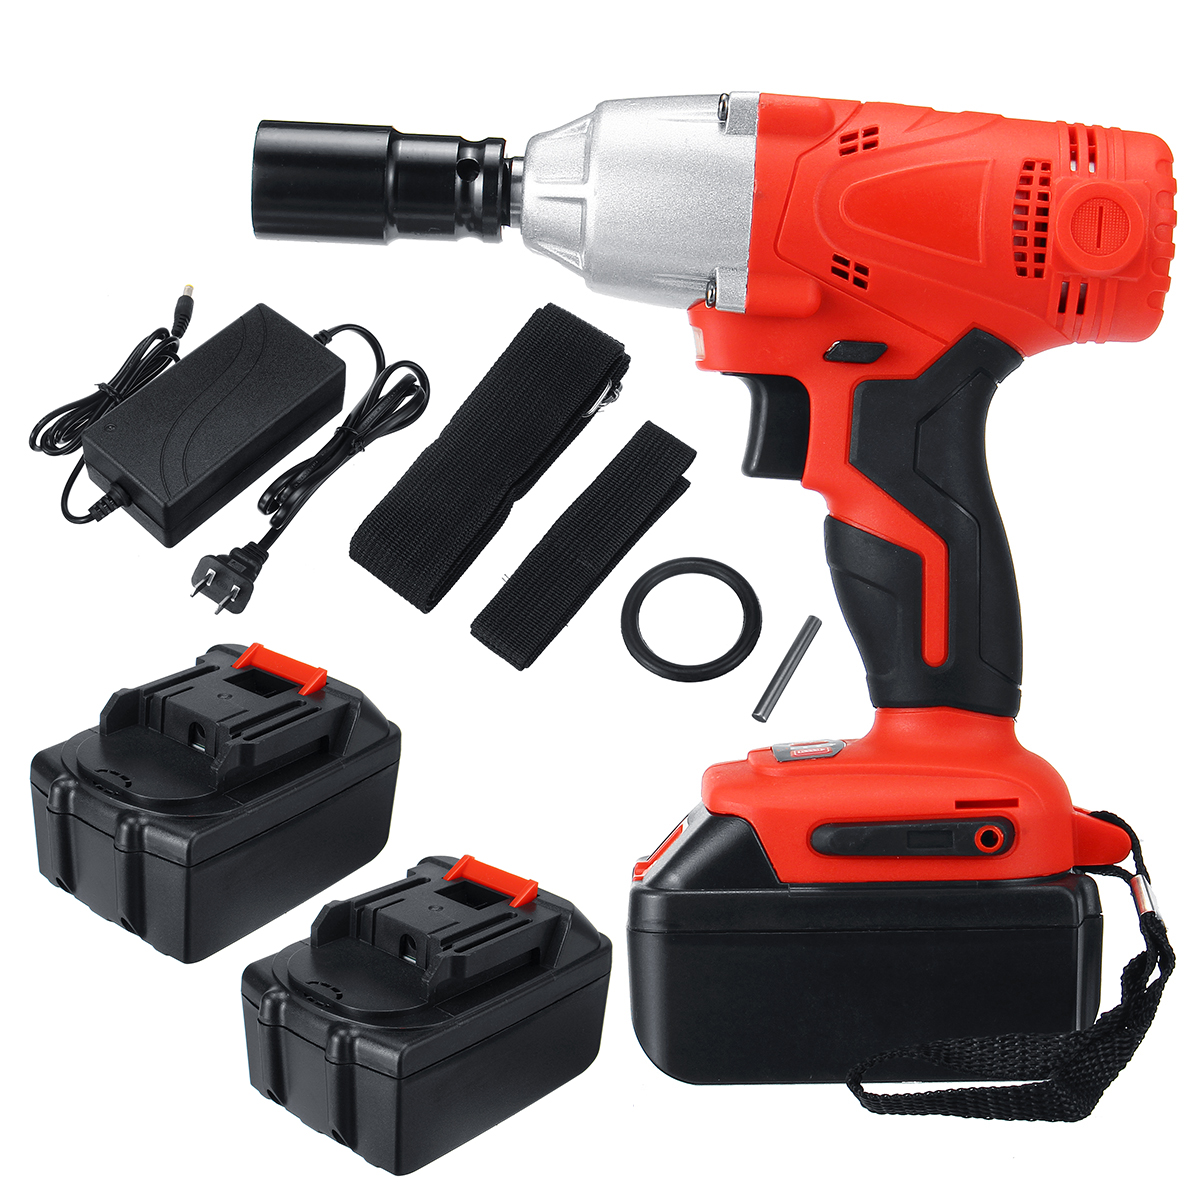 128VF188VF-Electric-Wrench-350Nm-High-Torque-Impact-Wrench-Cordless-12-Batteries-1-Charger-1431843-10